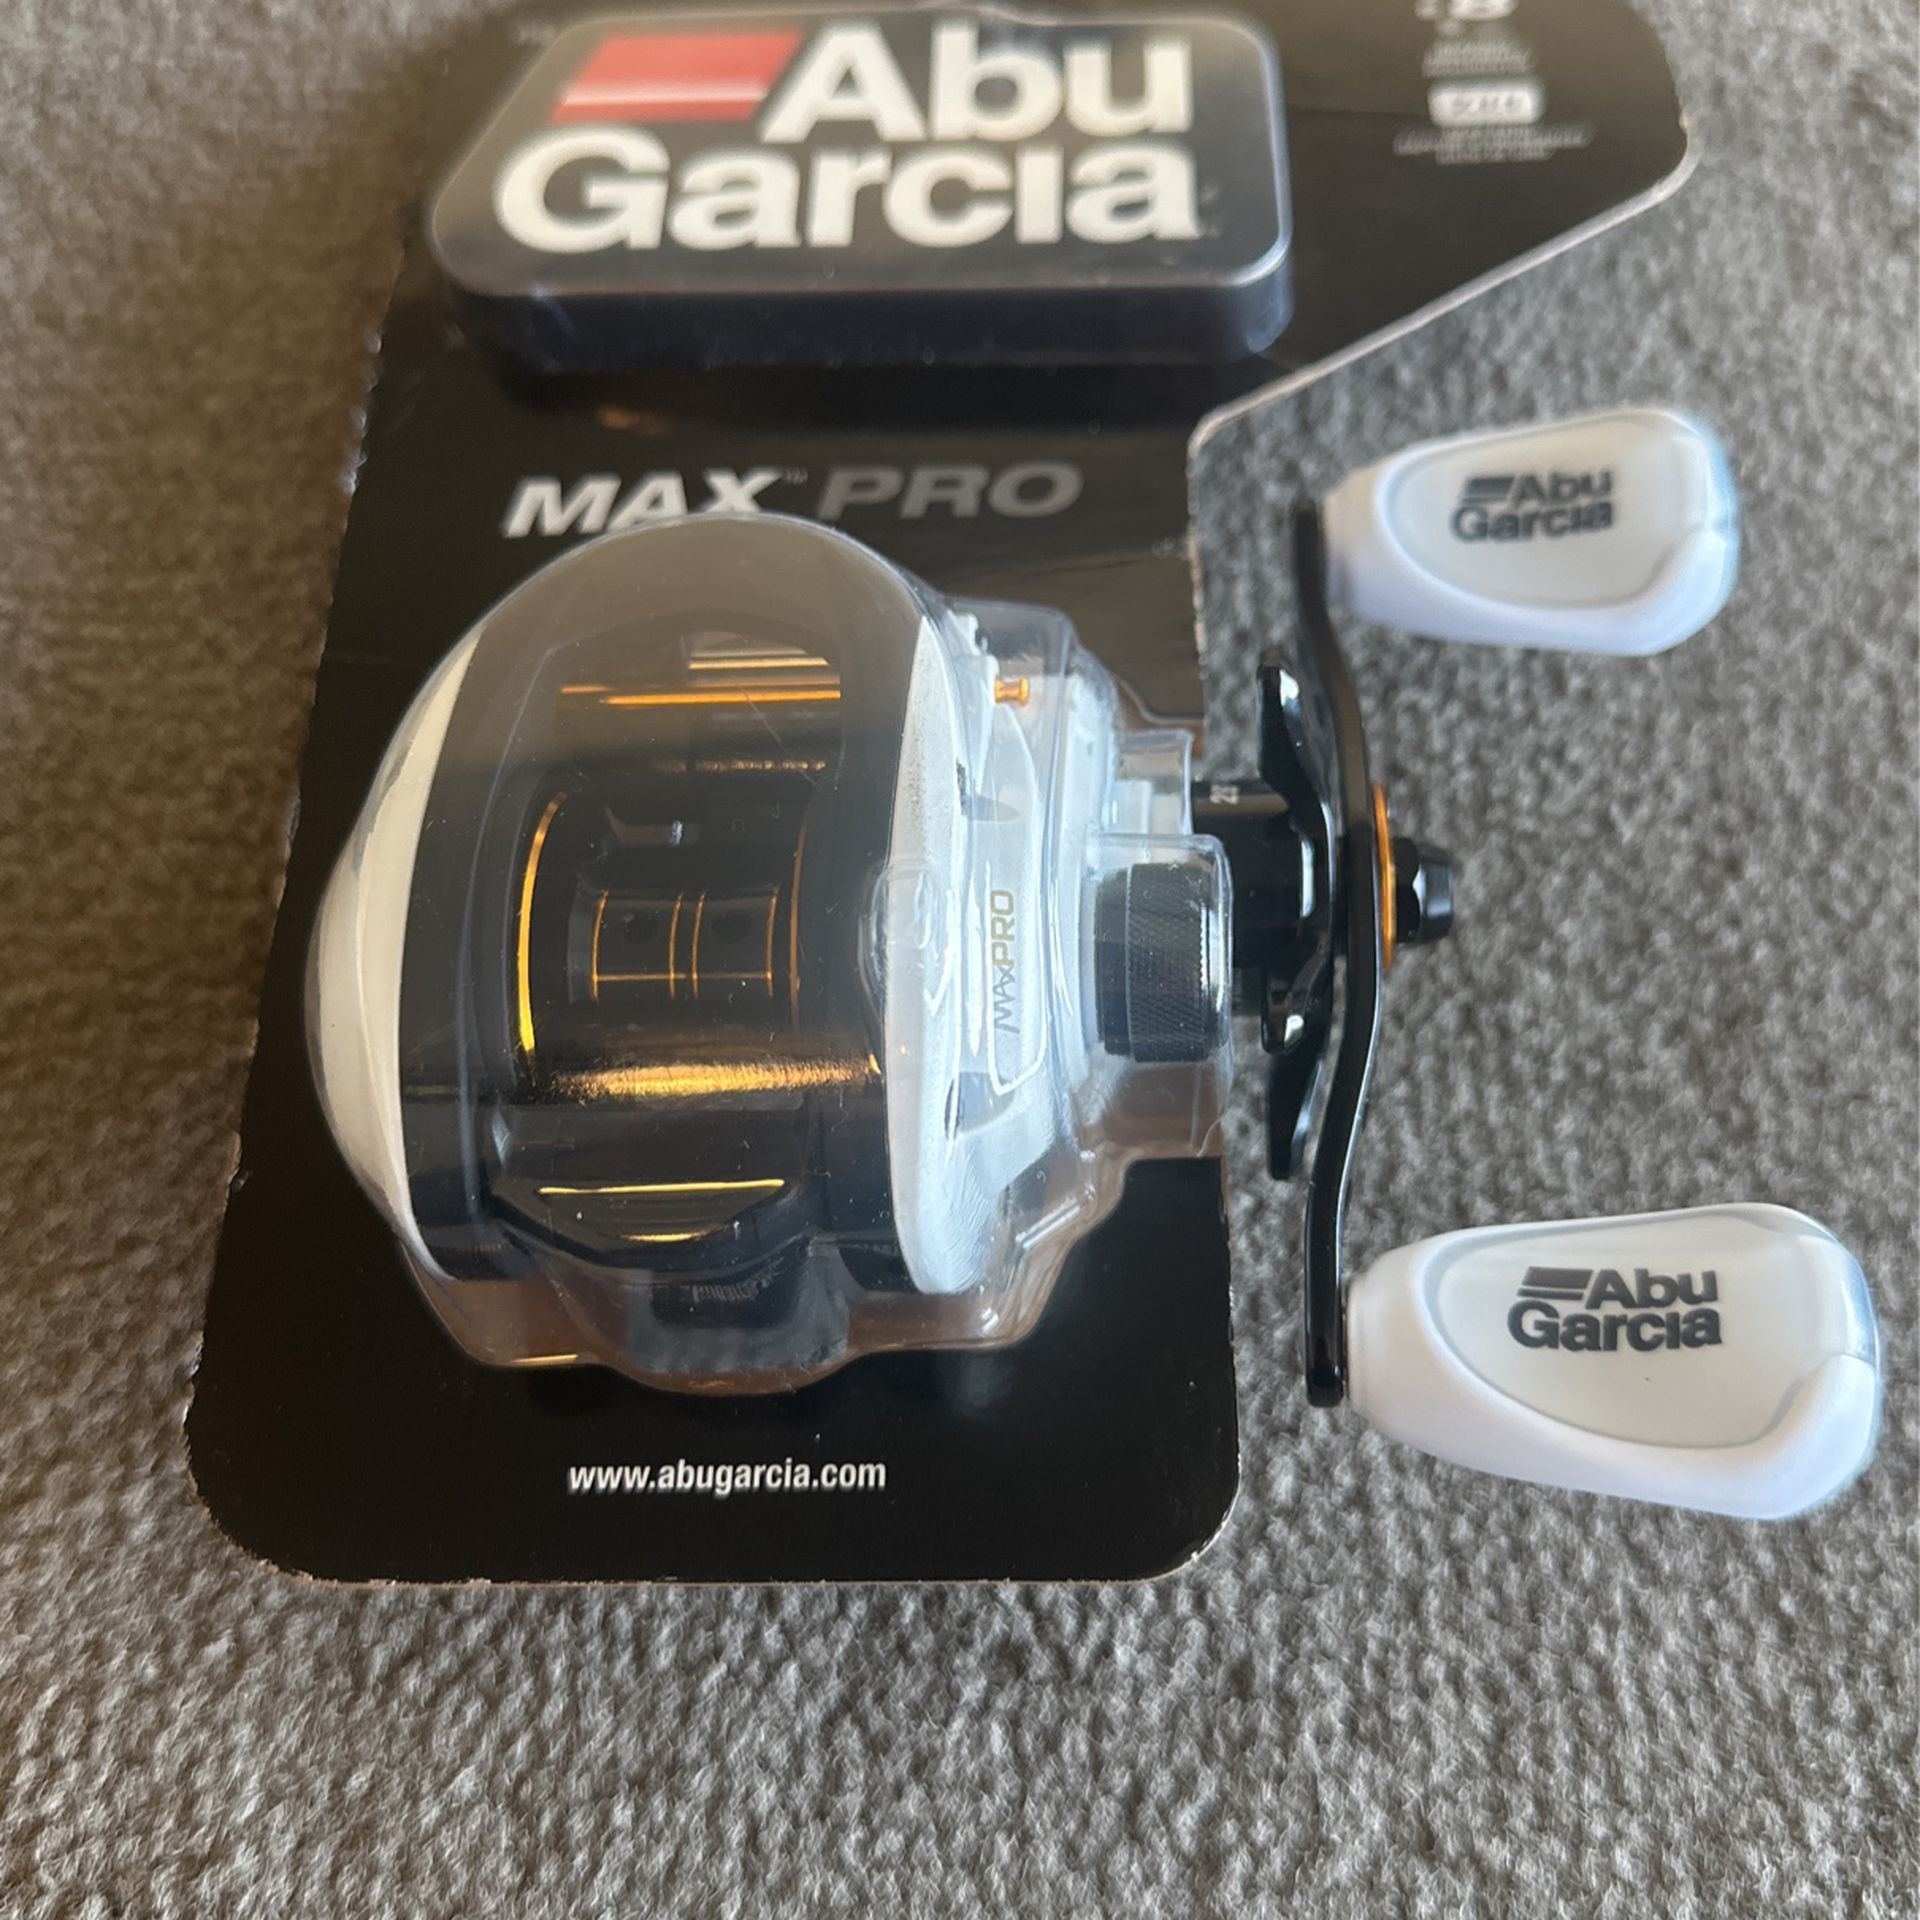 Abu Garcia Max Pro Baitcaster for Sale in Fort Worth, TX - OfferUp